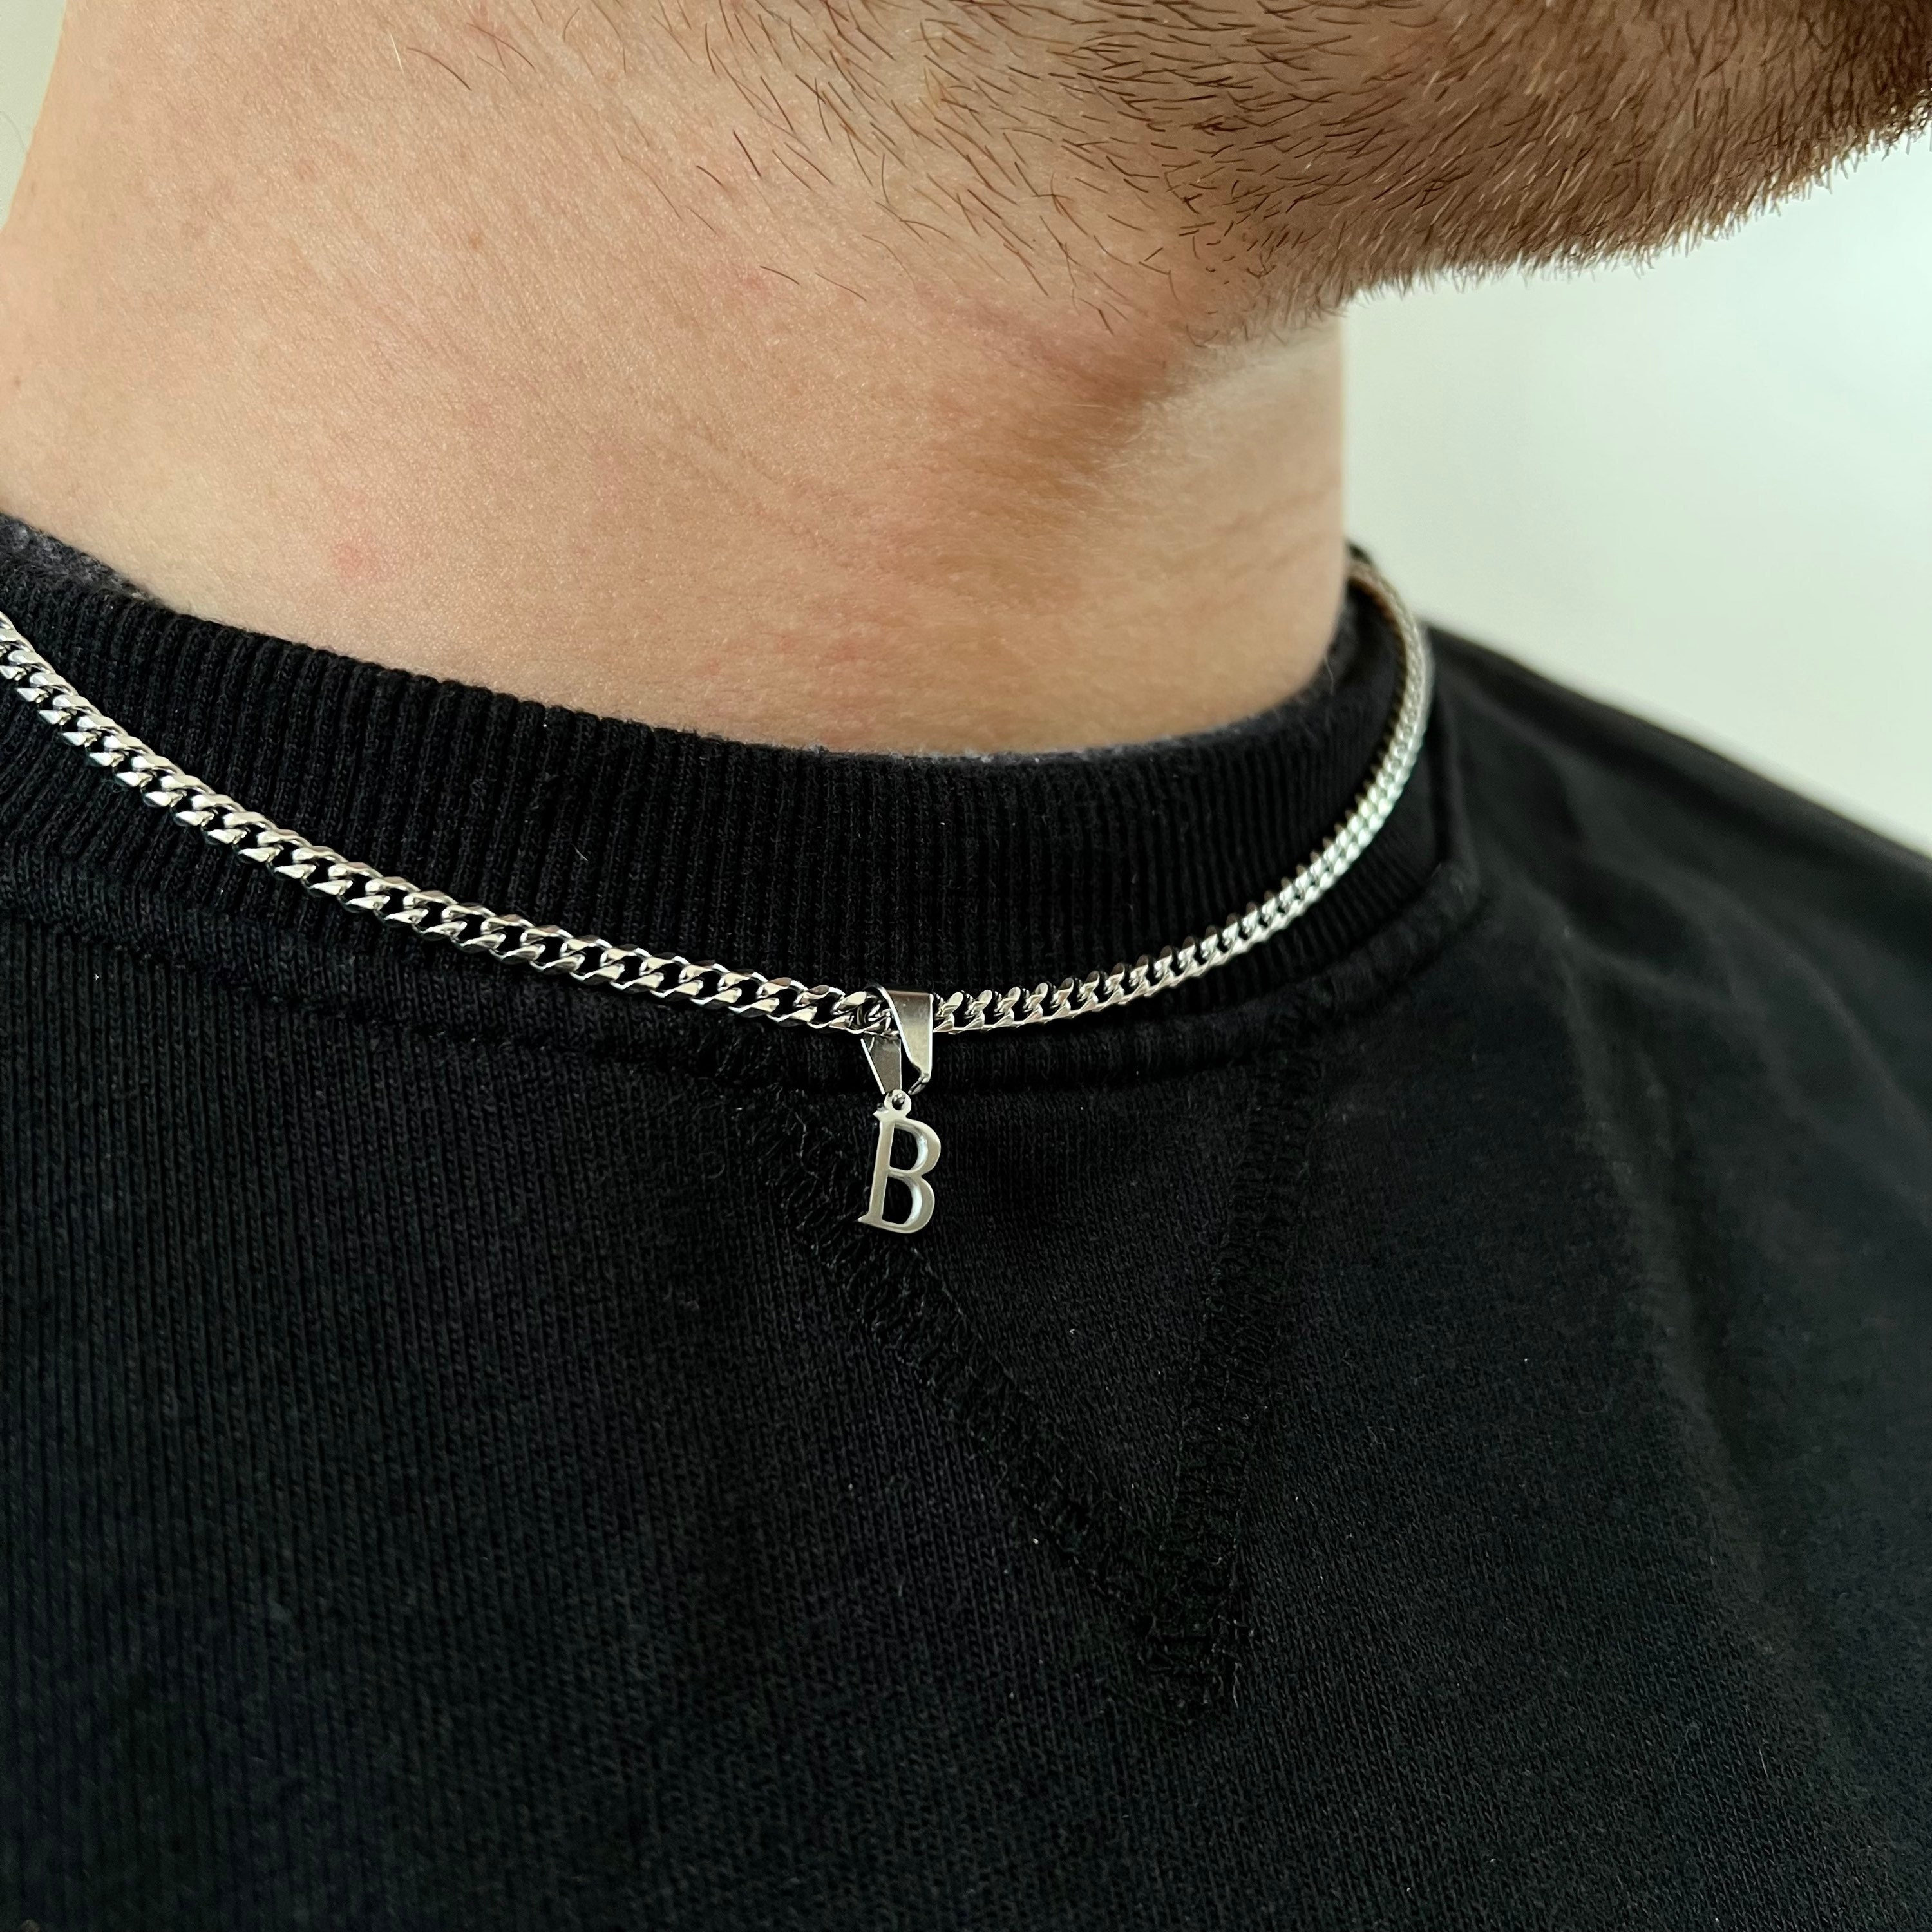 Mens Initial Necklace for Men / Women, Personalised Silver Necklace Letter Pendant, Thin Silver Chain with Initial Pendant by Twistedpendant